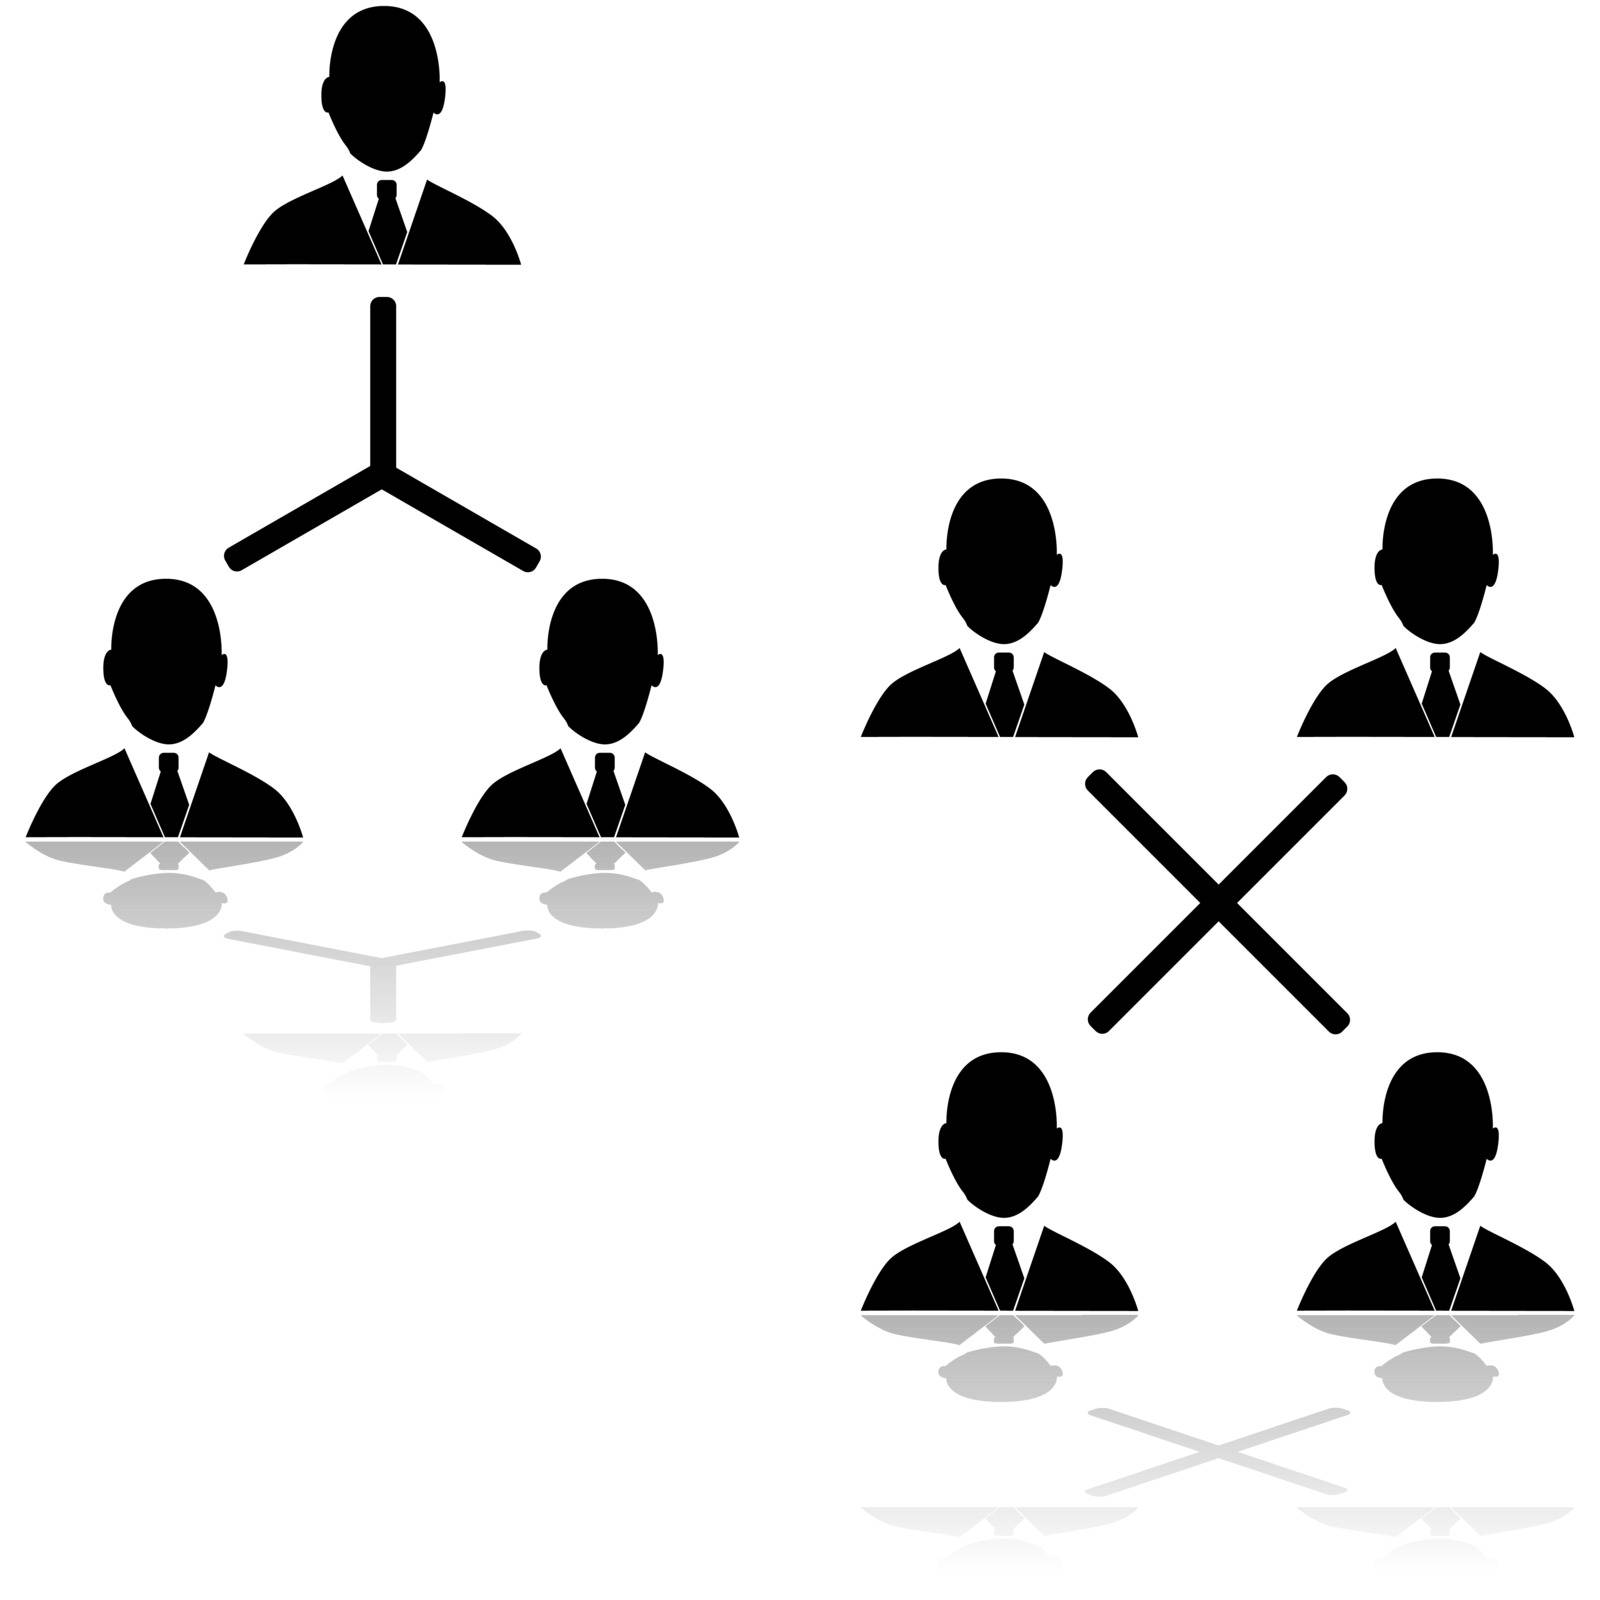 Icon set showing different connections between businessmen